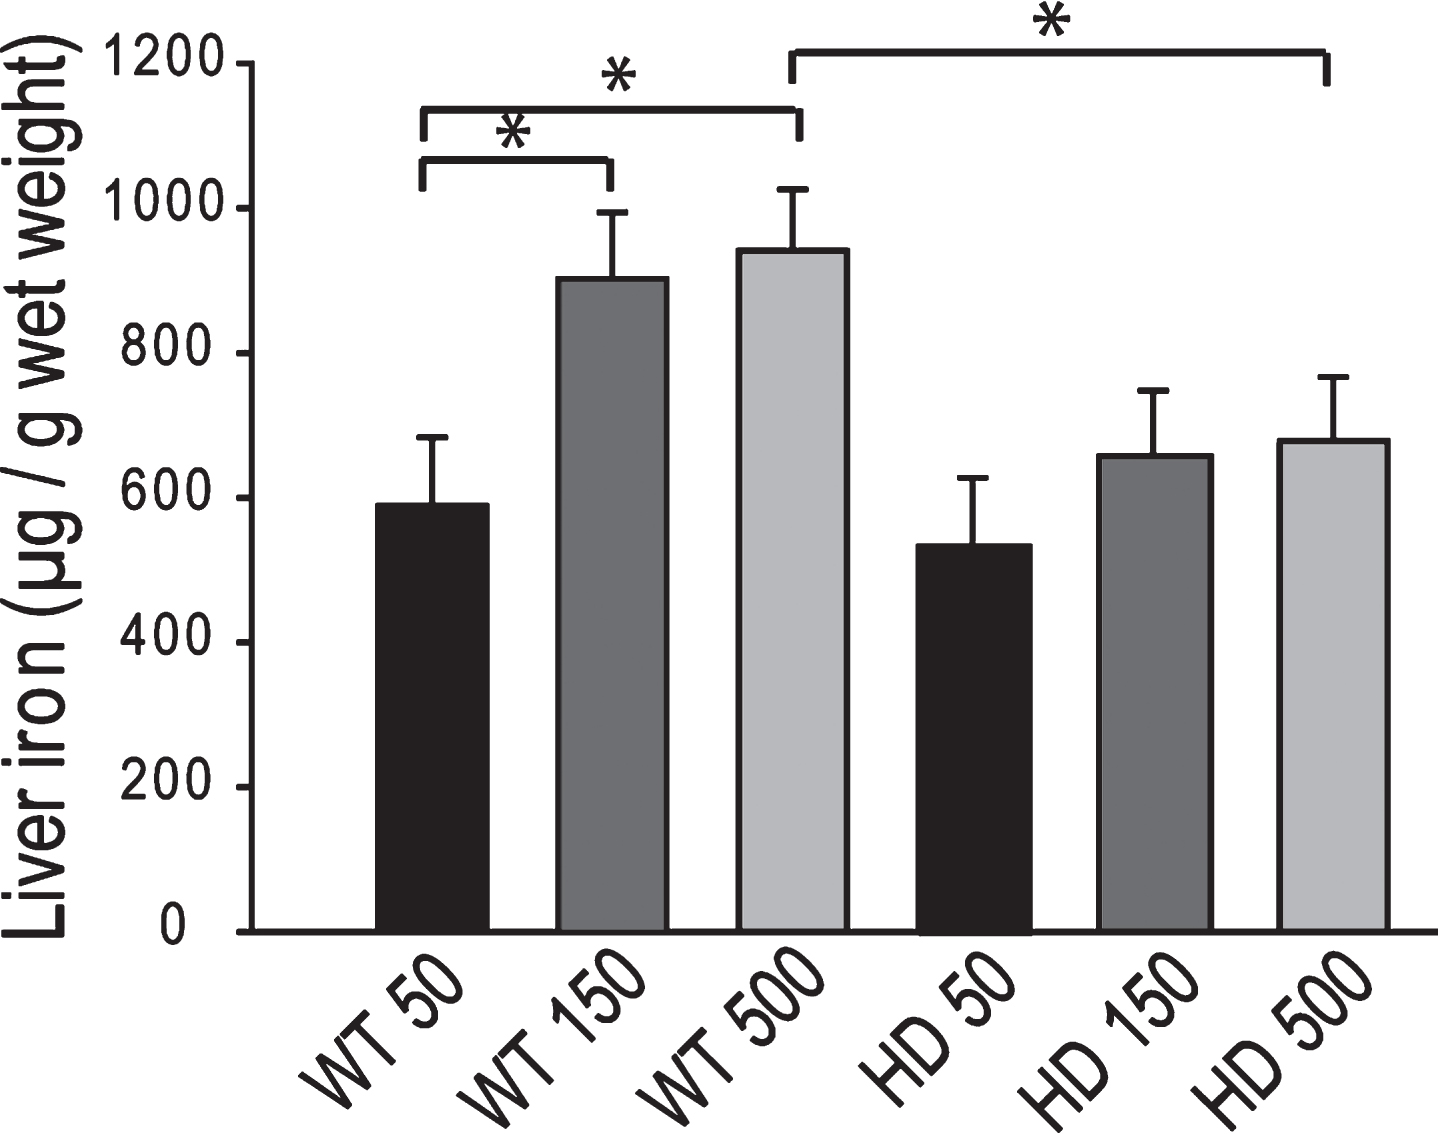 YAC128 HD mice have an altered peripheral response to adult iron intake level. Medium and high dietary iron intake levels in adult mice (150 and 500 ppm, respectively) results in increased liver iron in wild-type but not YAC128 HD mice at 1-year of age. P-value: *p < 0.05, n = 12–15.